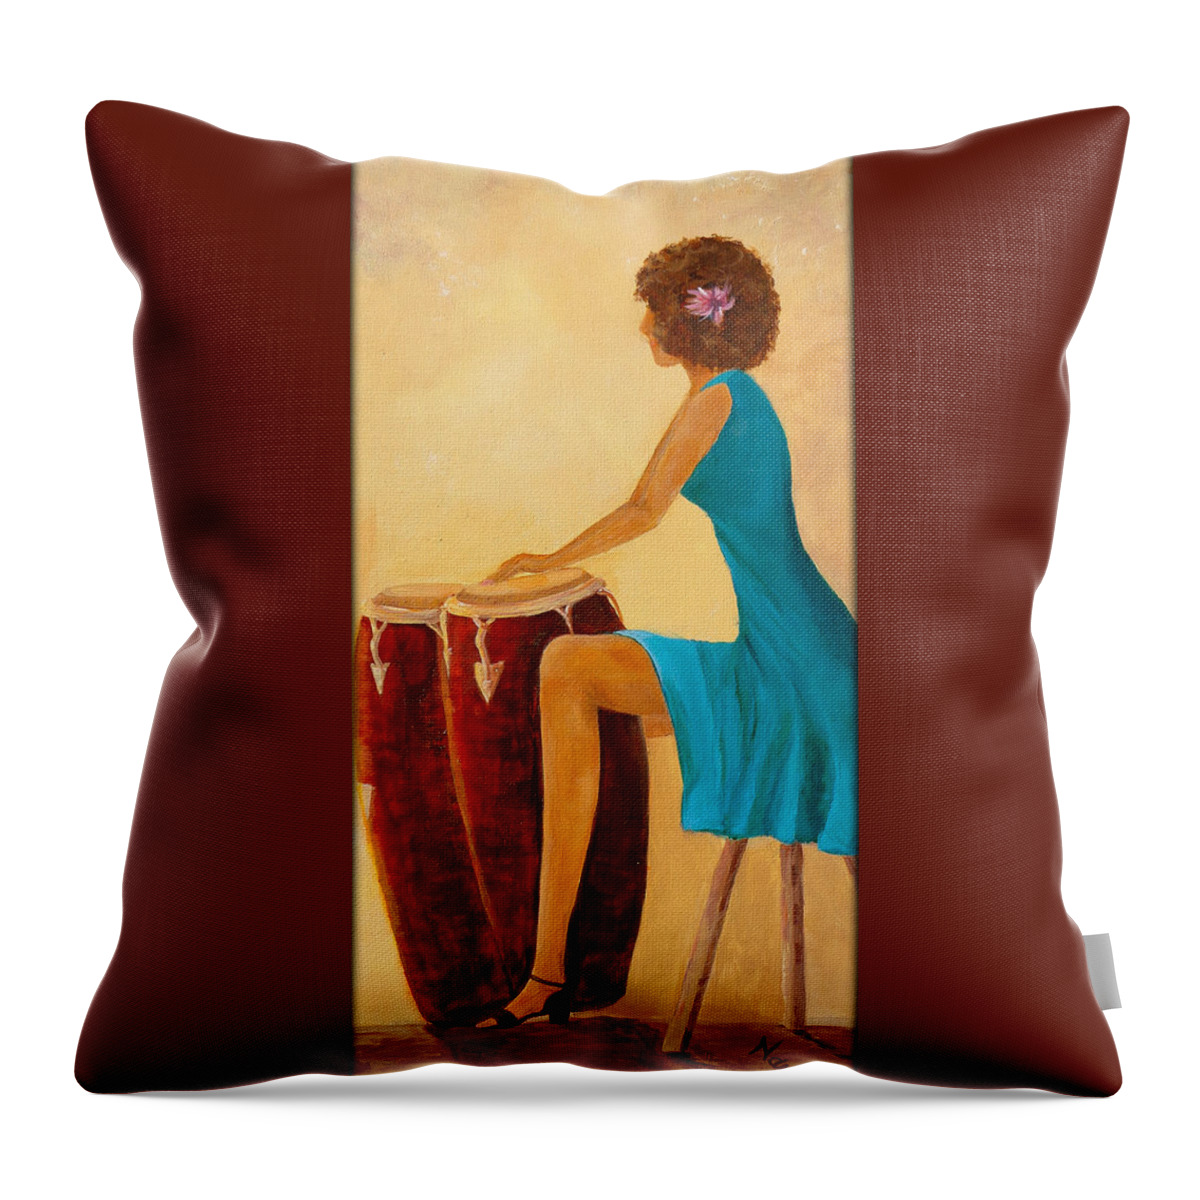 Drumming Throw Pillow featuring the painting Conga Gal by Deborah Naves